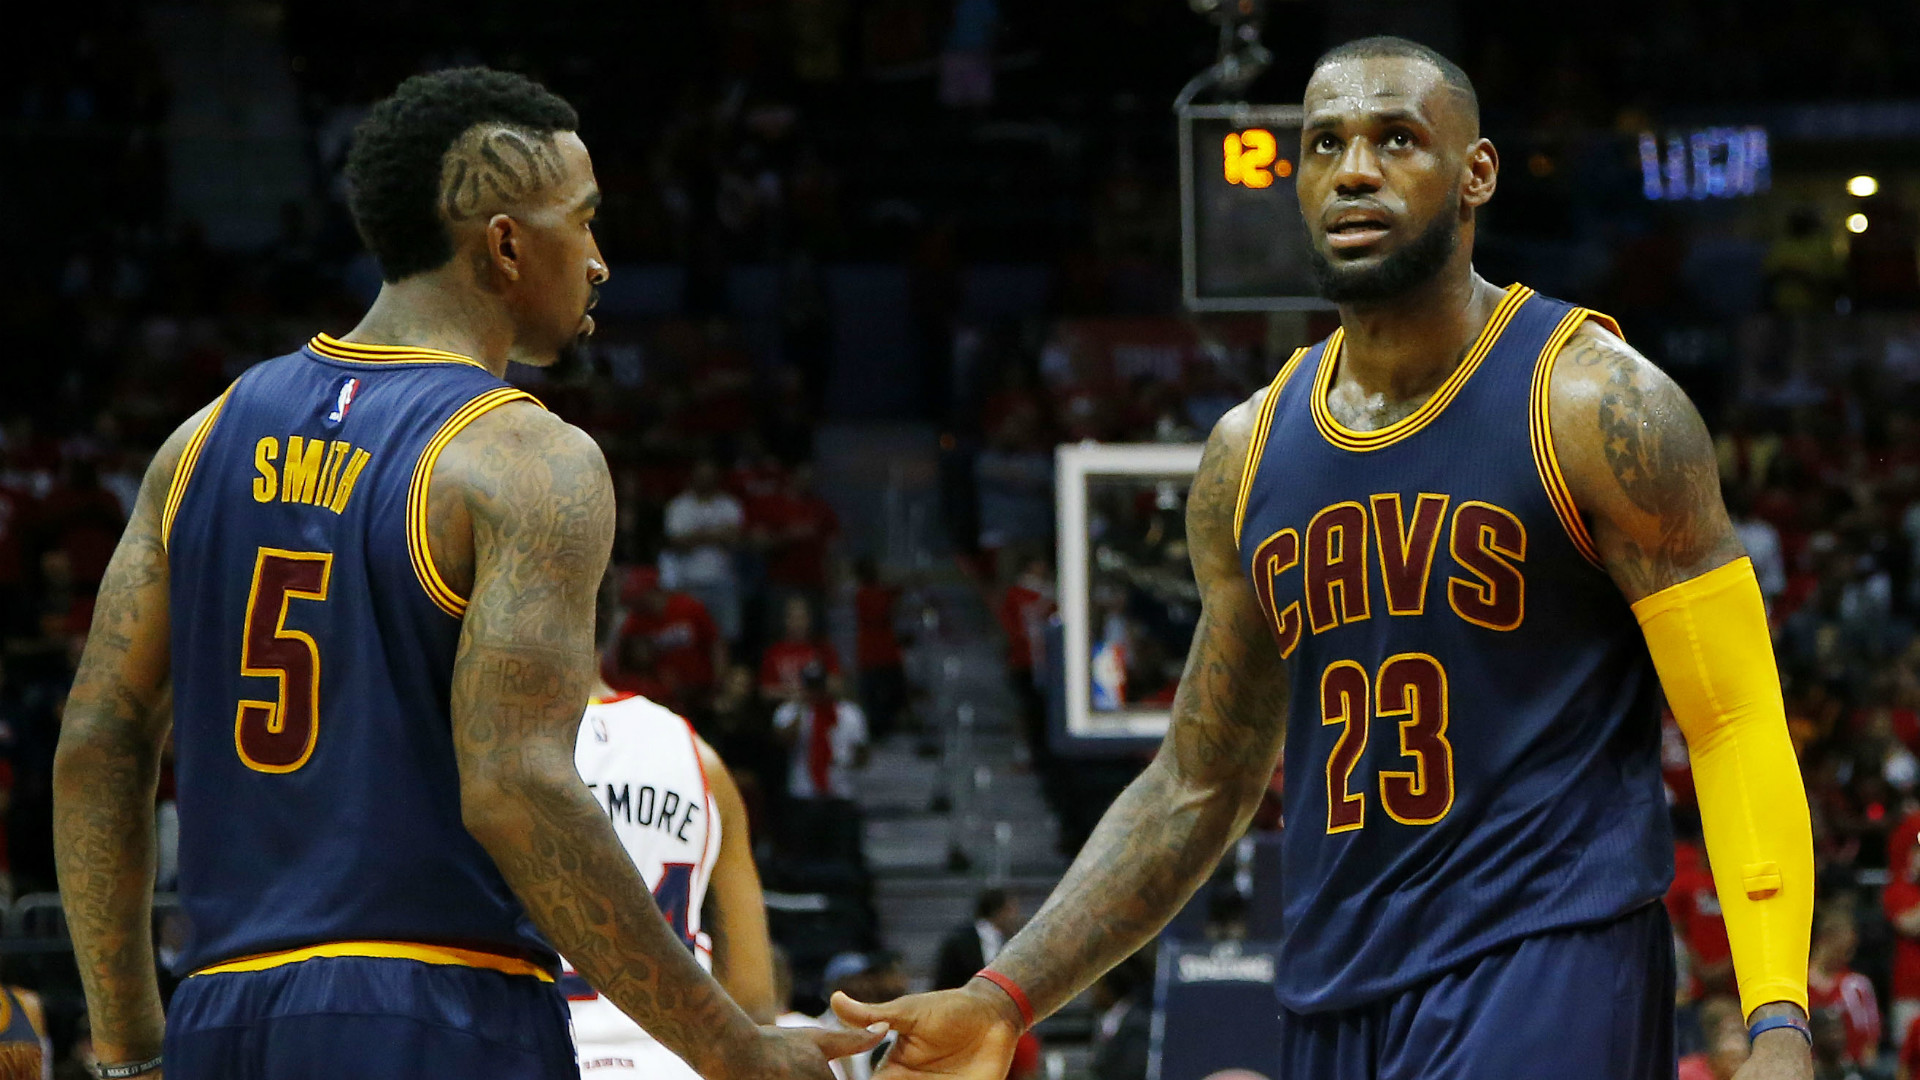 1920x1080 LeBron James calls out Cavs for role in J.R. Smith's contract talks